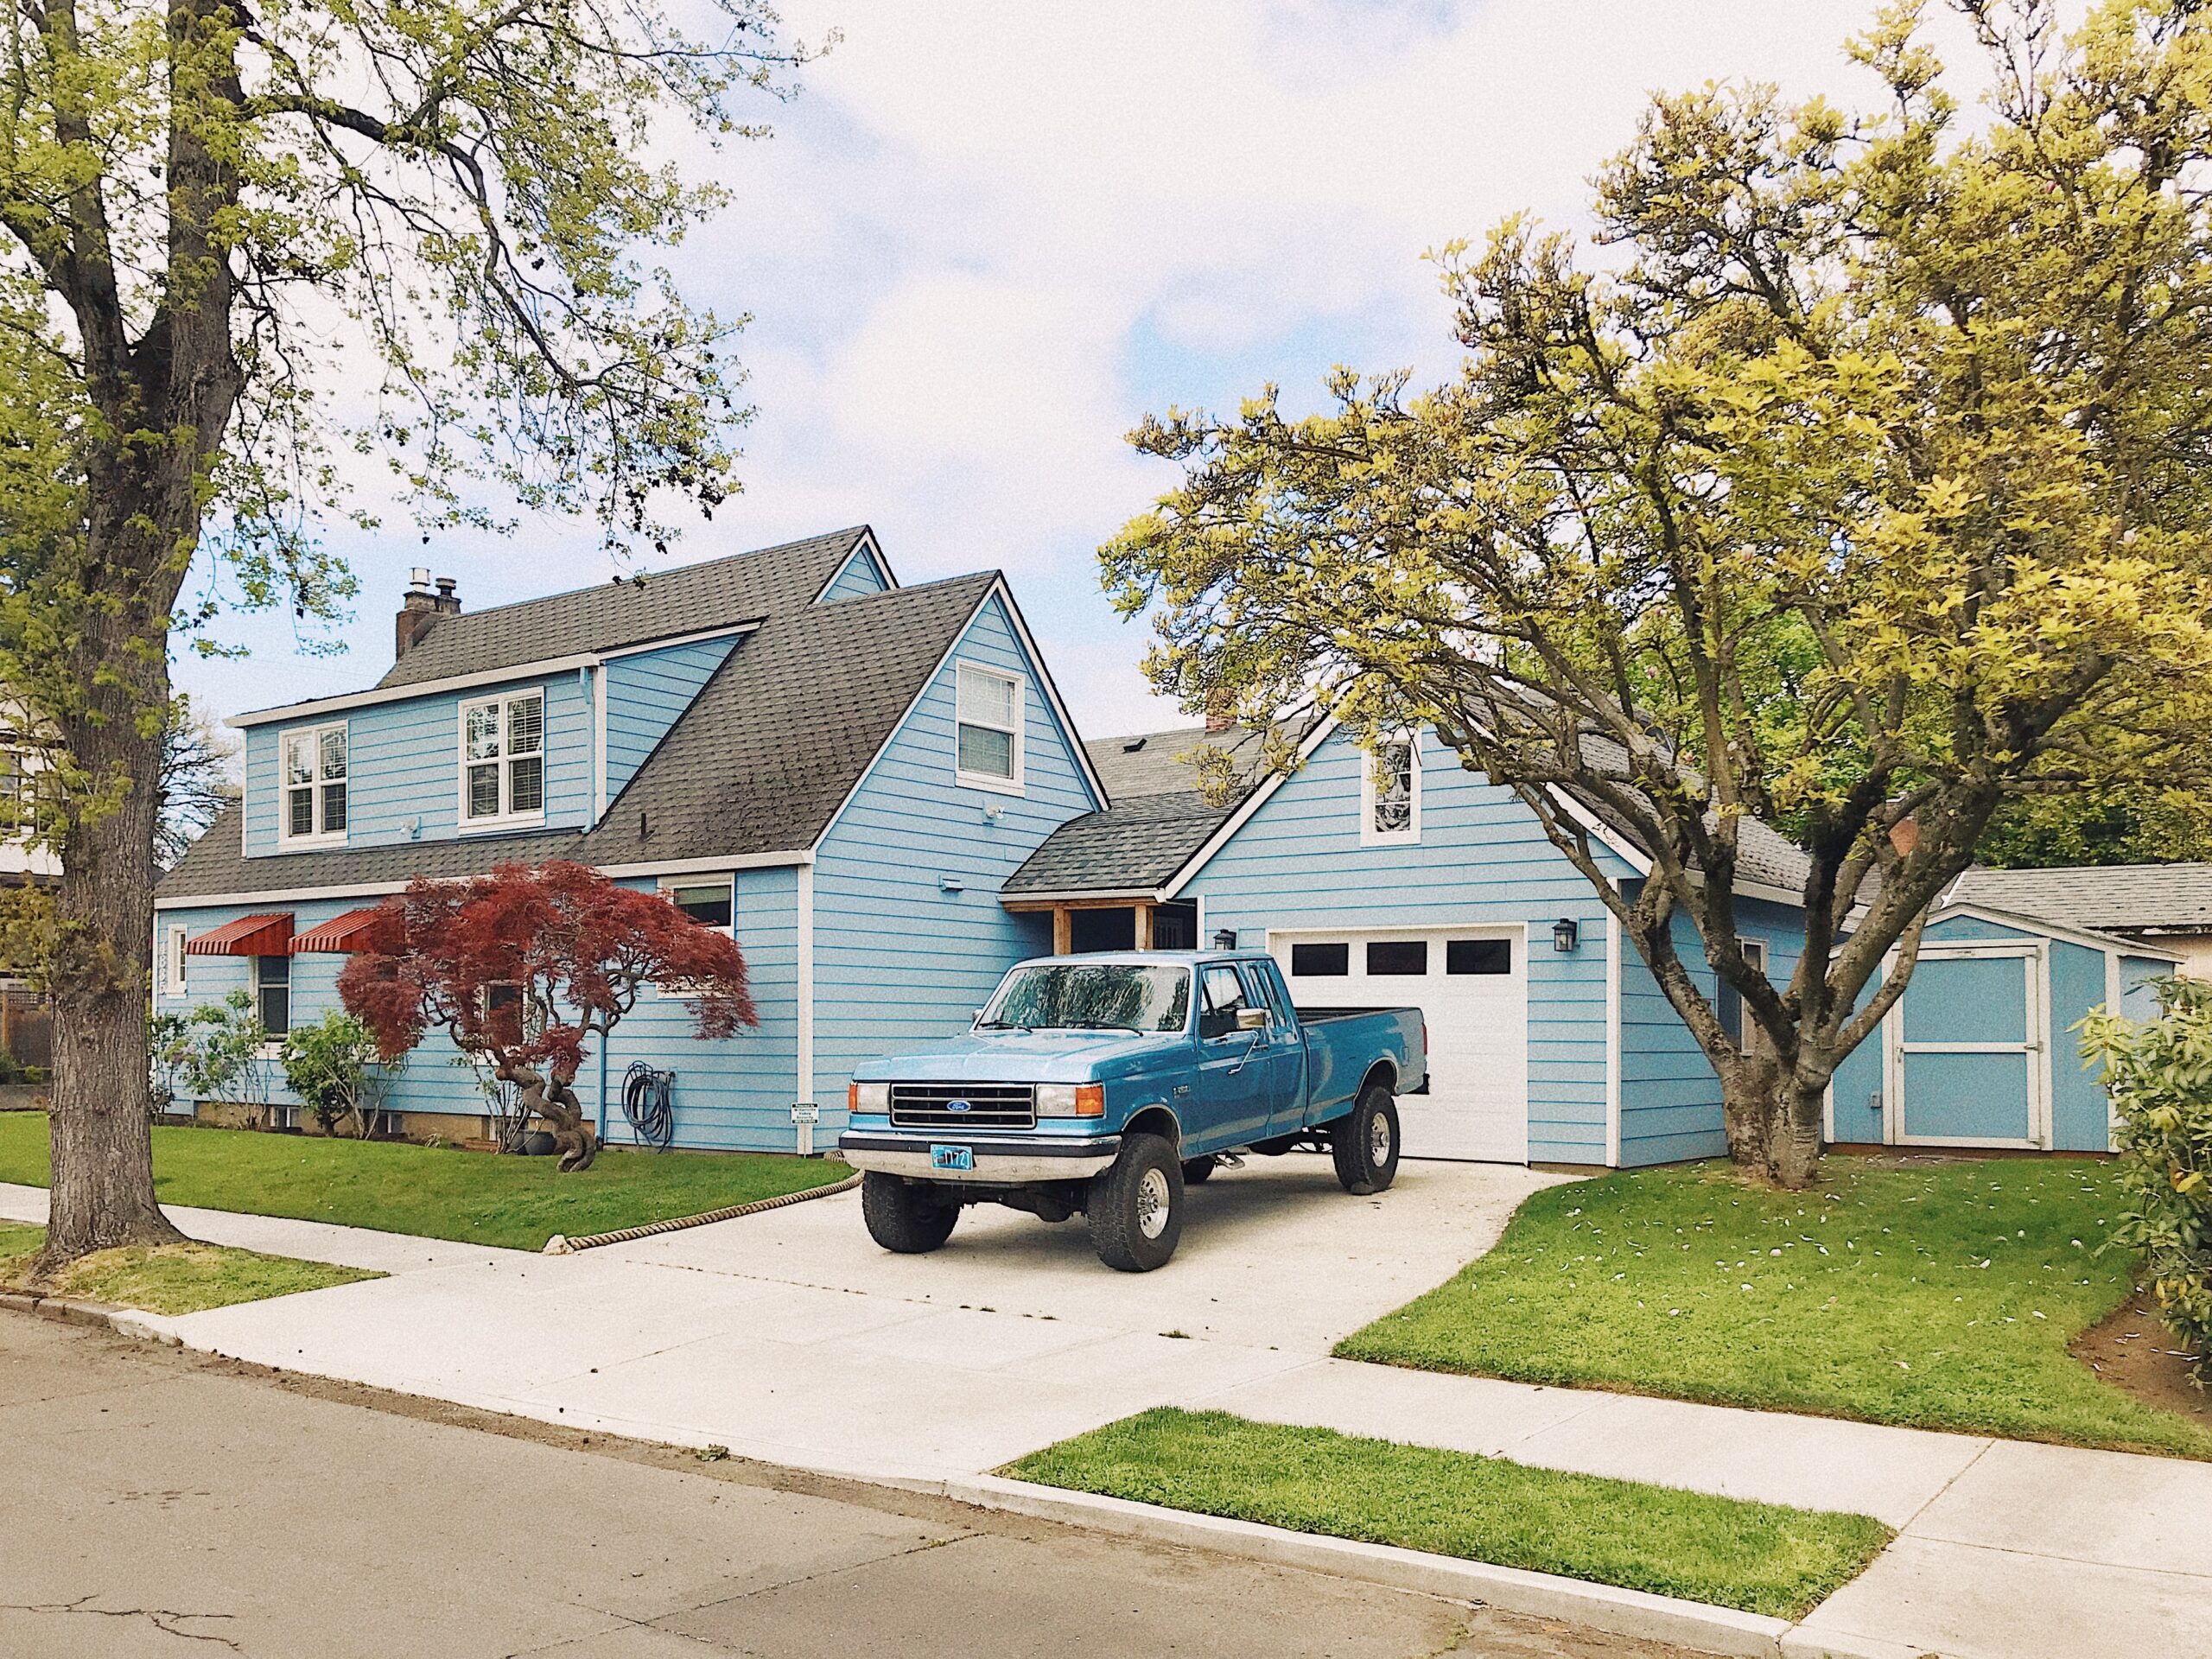 blue California house with blue truck in the driveway